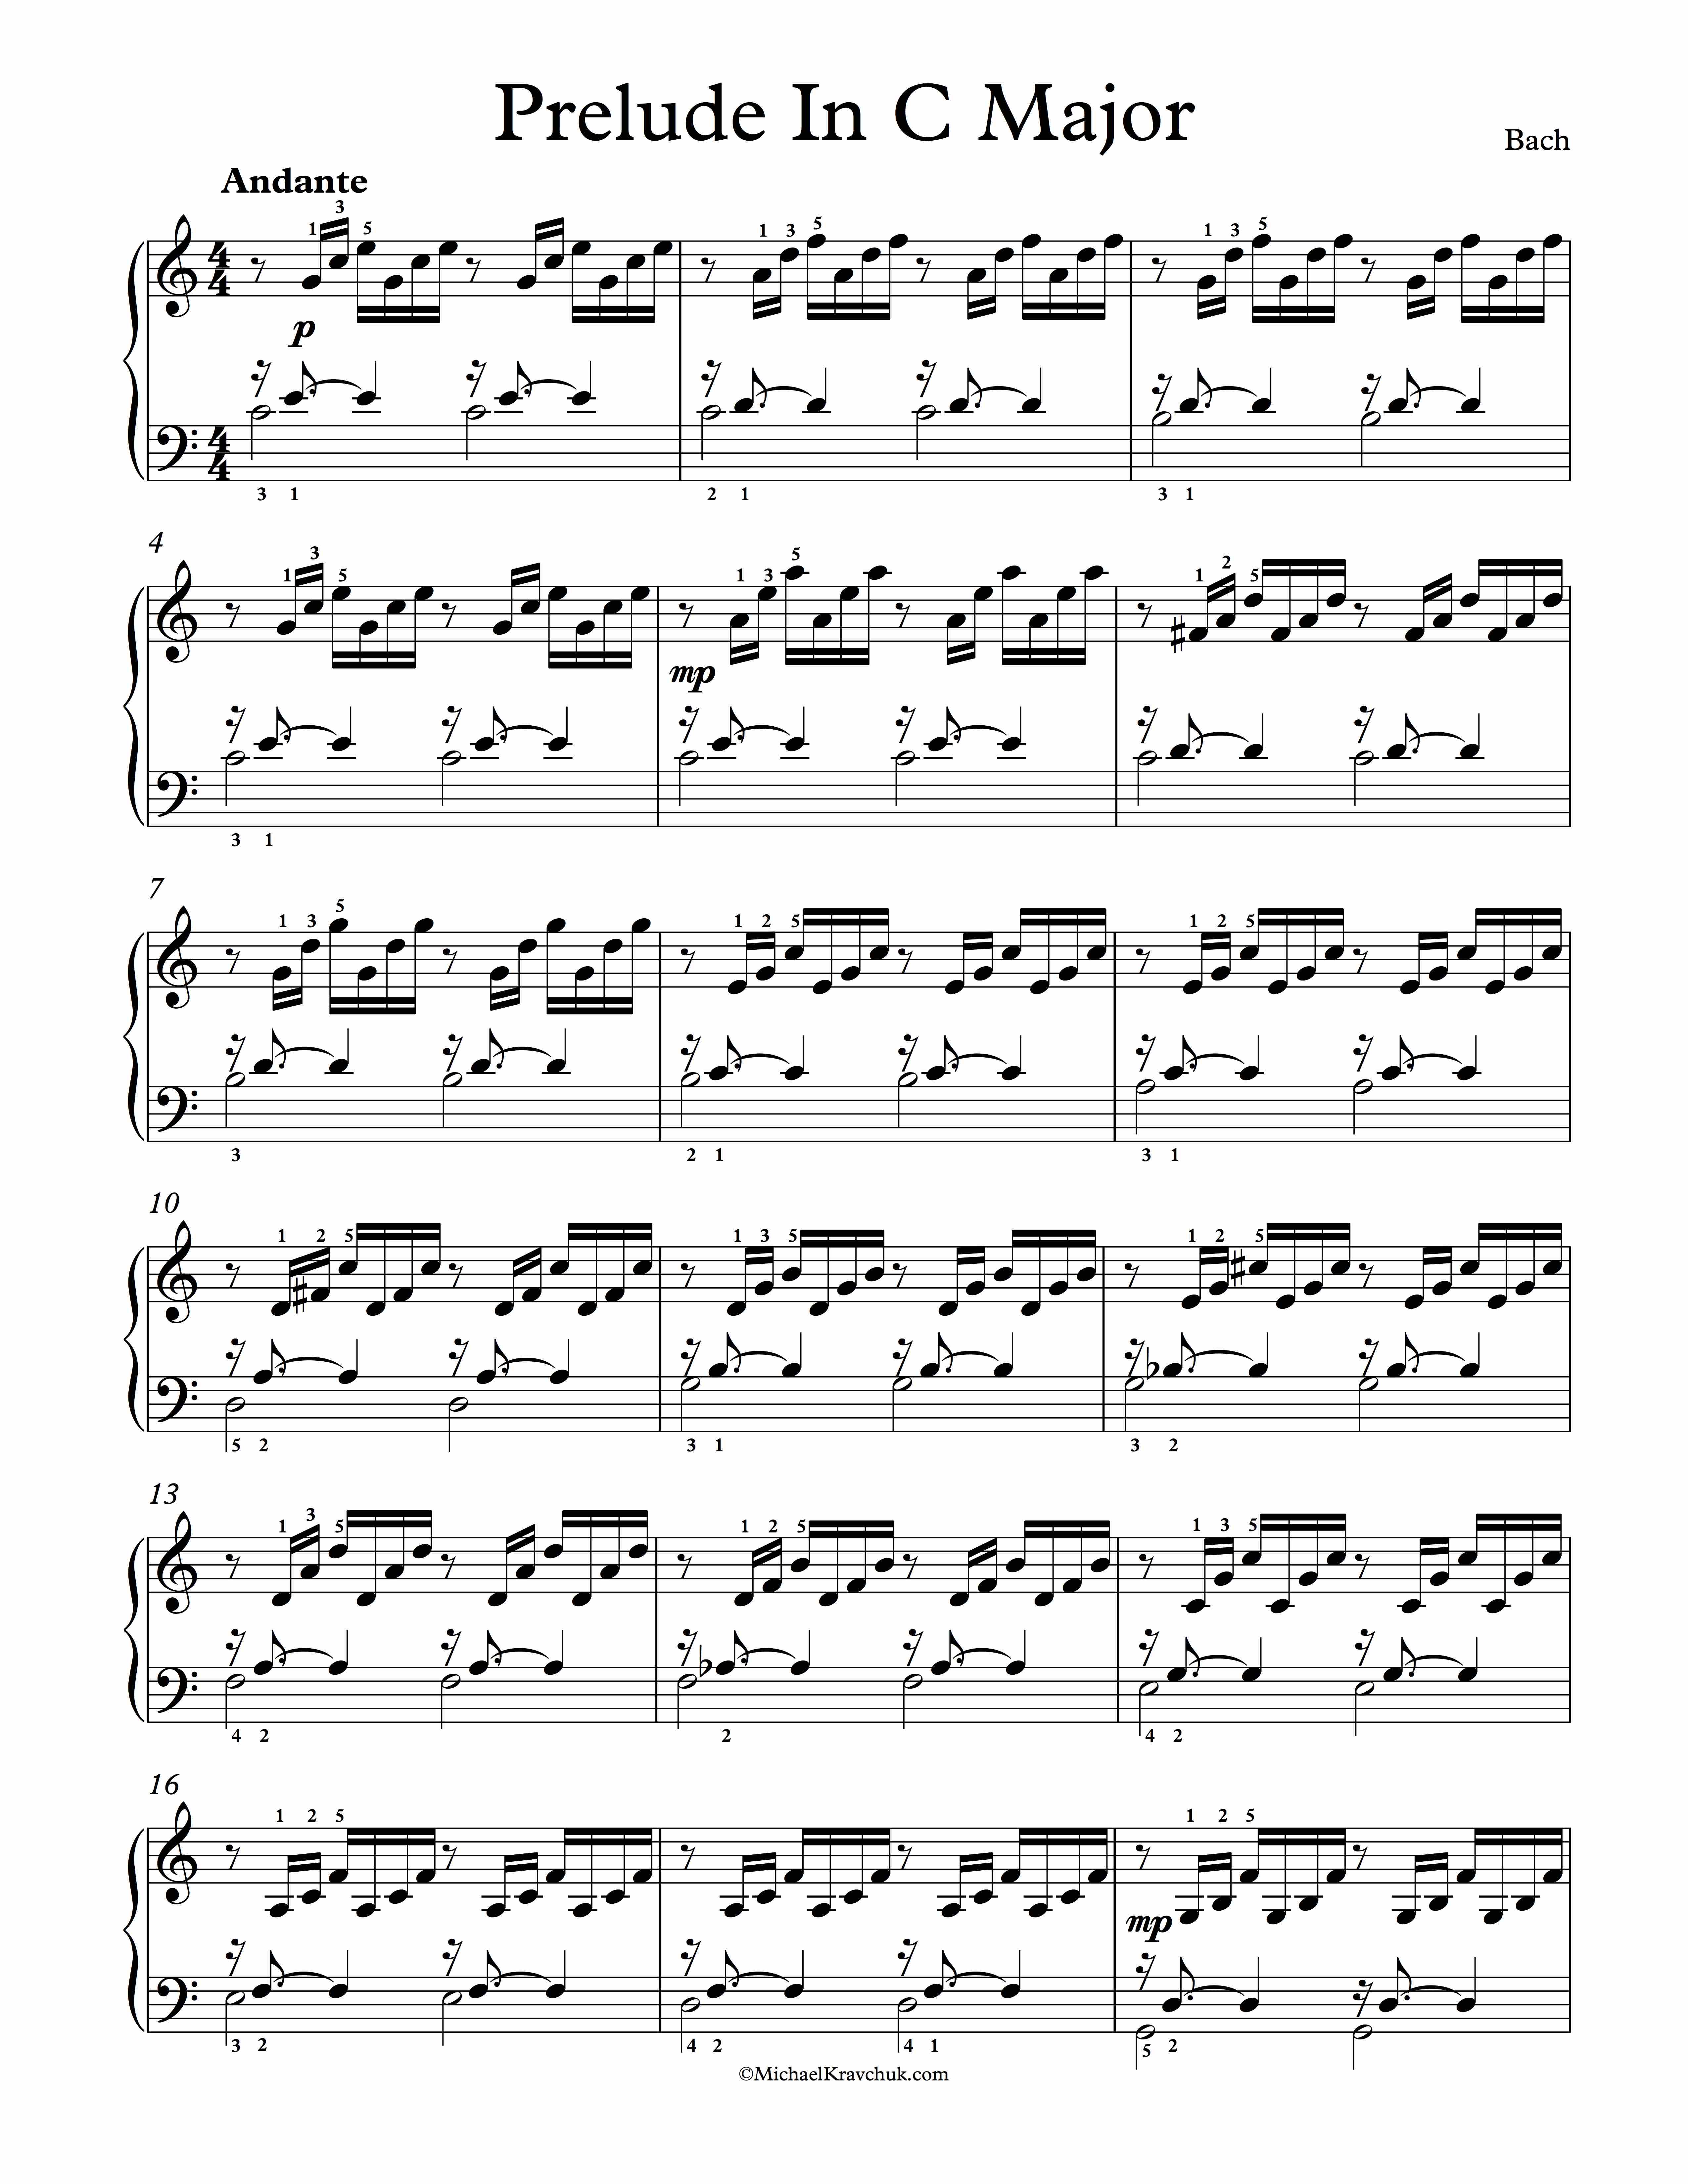 Free Piano Sheet Music - Prelude In C Major - Bach